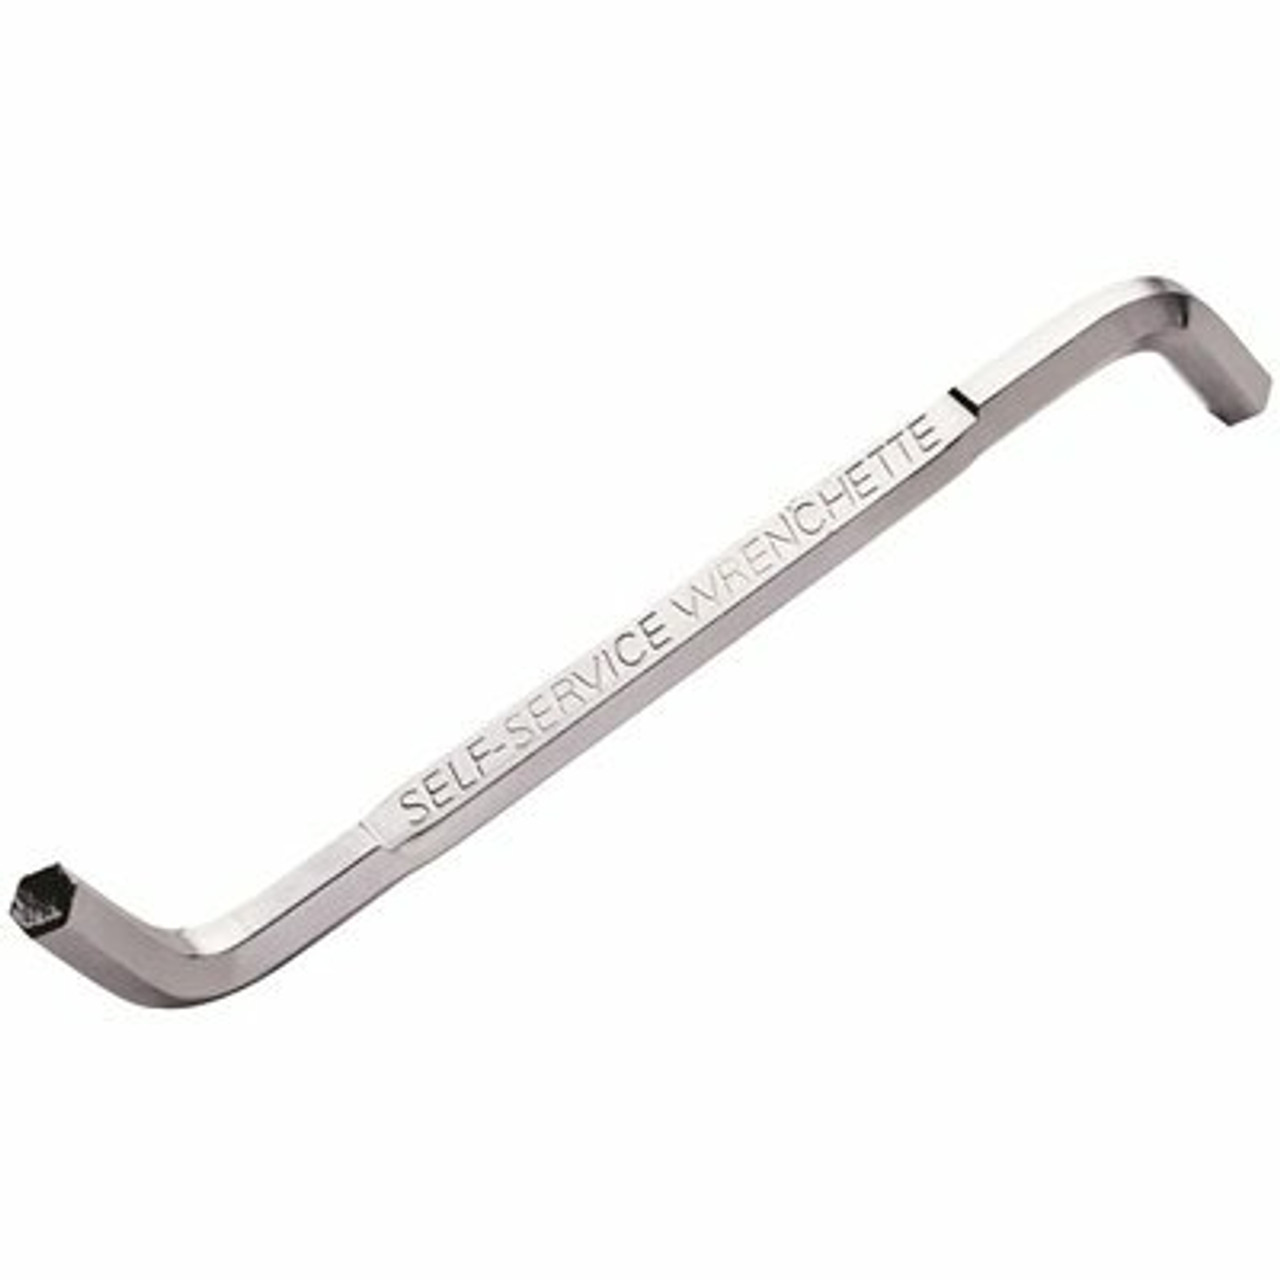 Insinkerator Garbage Disposal Jam-Buster Wrench Accessory For Insinkerator Disposal